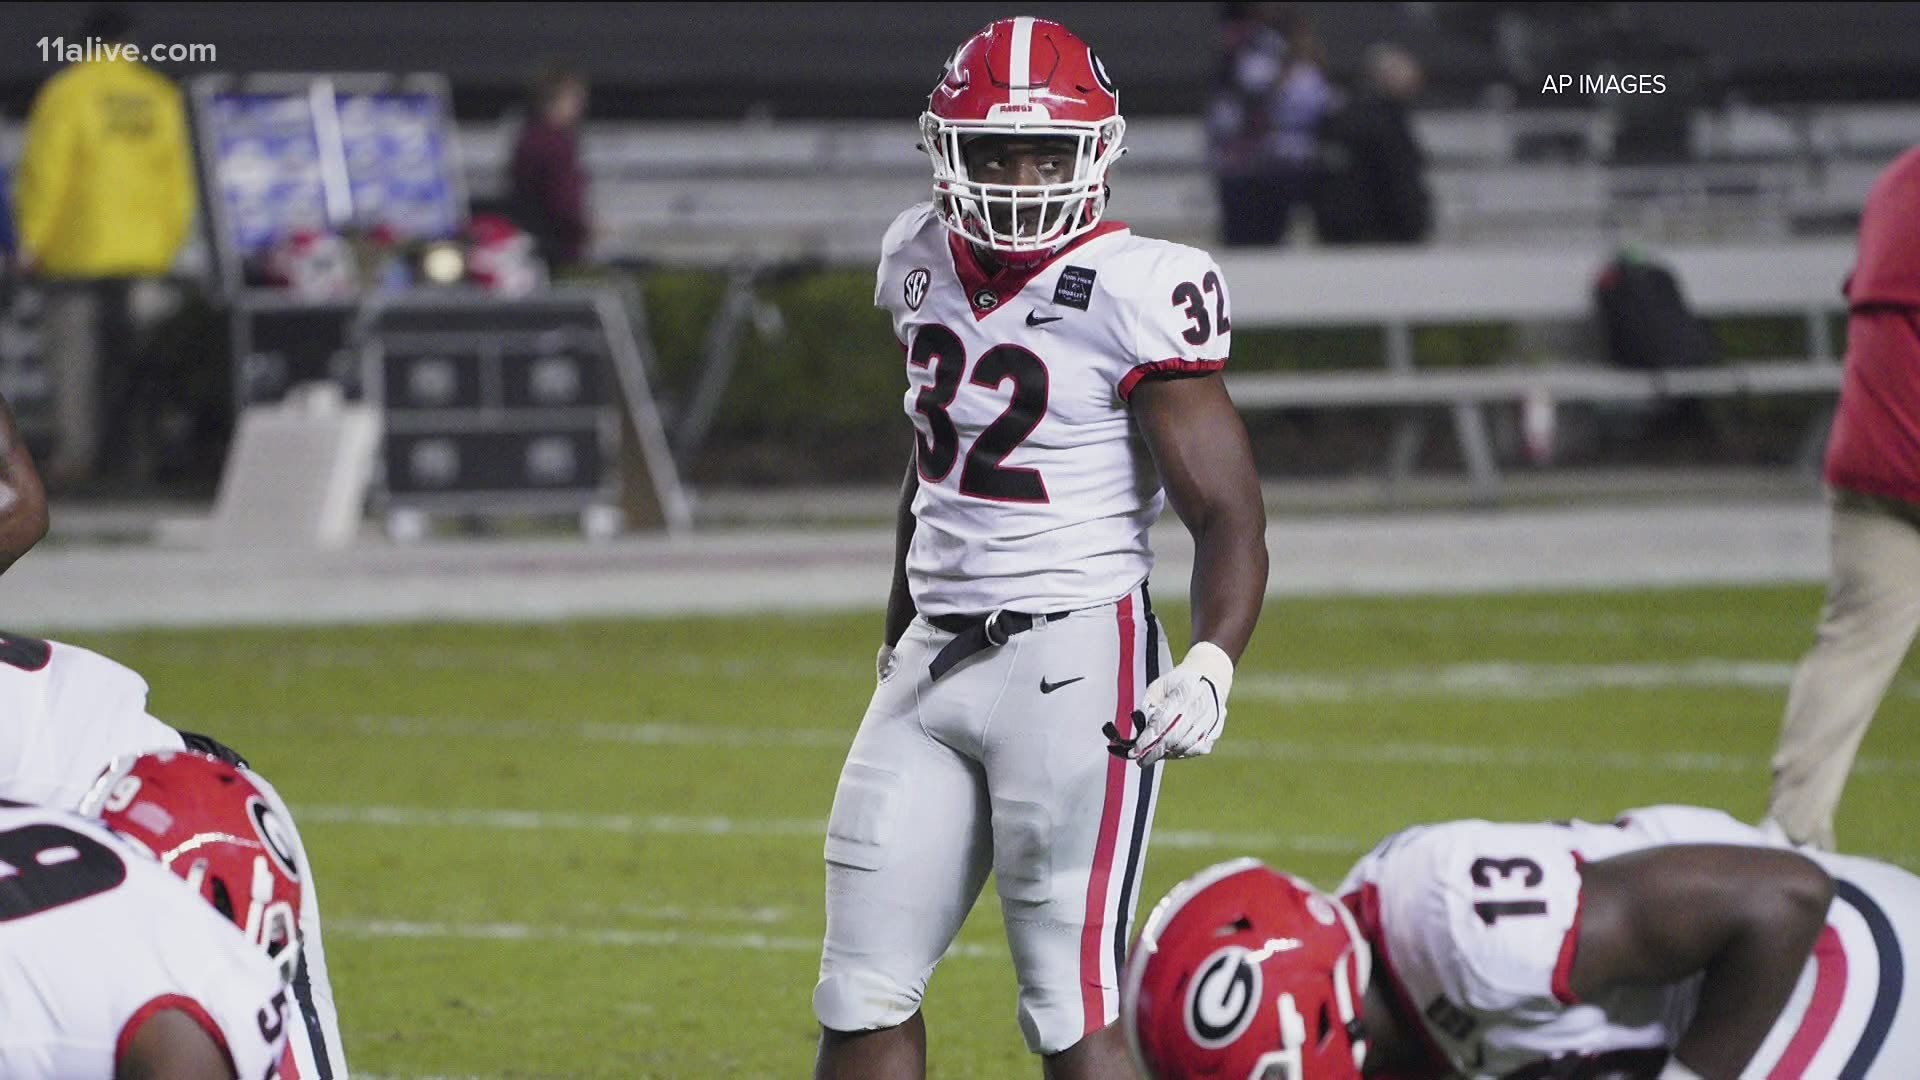 11Alive Sports' Maria Martin spoke with one of the top Dawgs in this year's draft class.